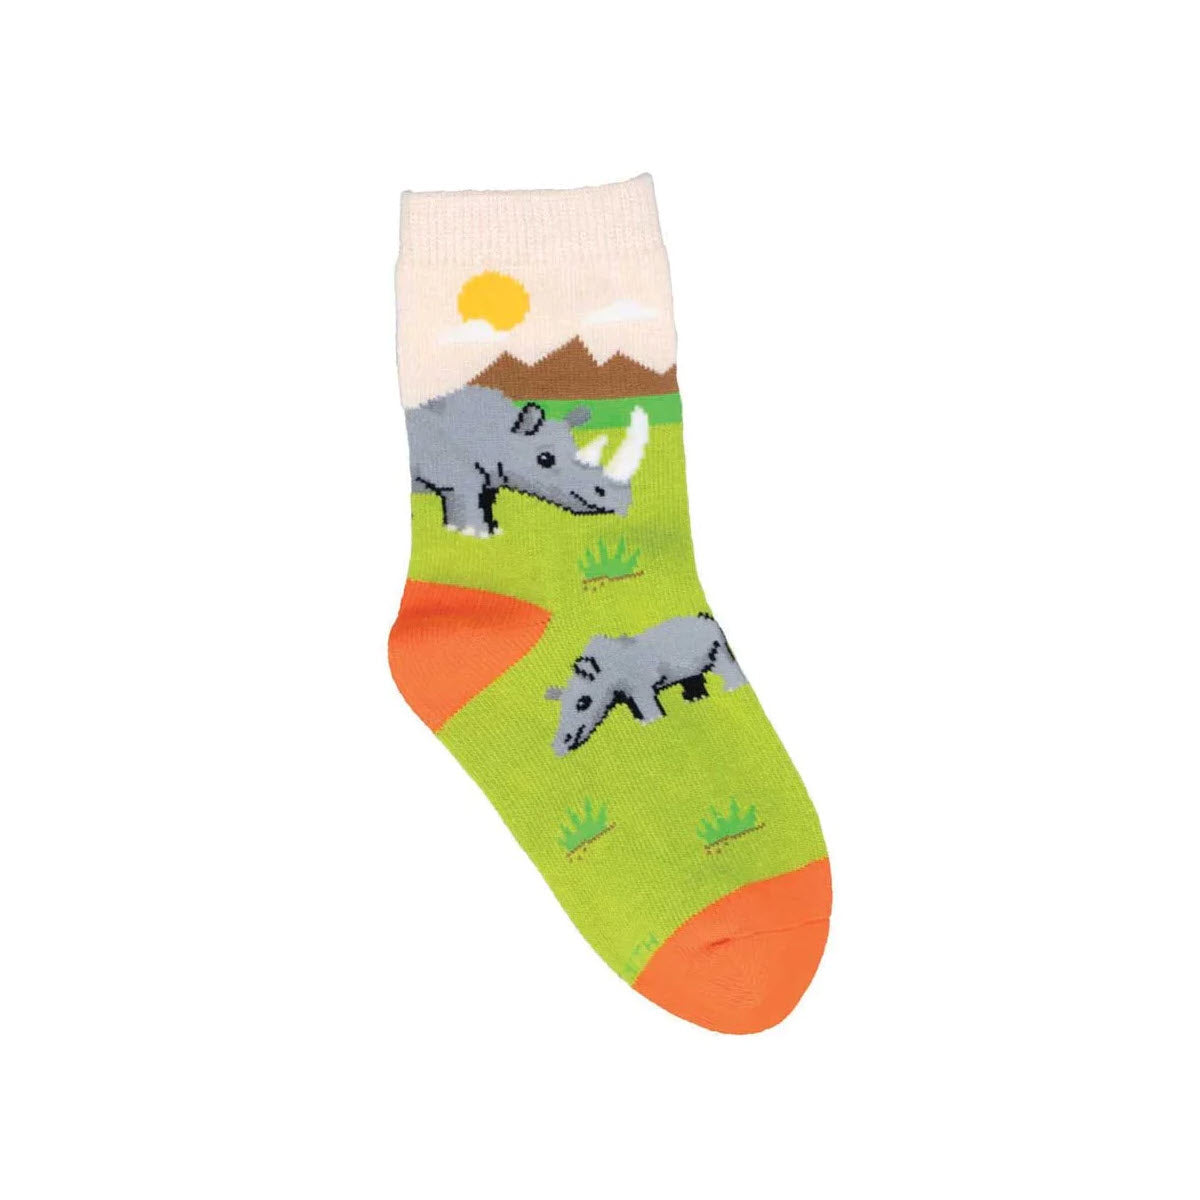 A single SOCKSMITH RAMBUNCTIOUS RHINOS CREW SOCKS PEACH - KIDS with a colorful pattern featuring gray wild rhinos, orange accents, and small brown mountains under a yellow sun.